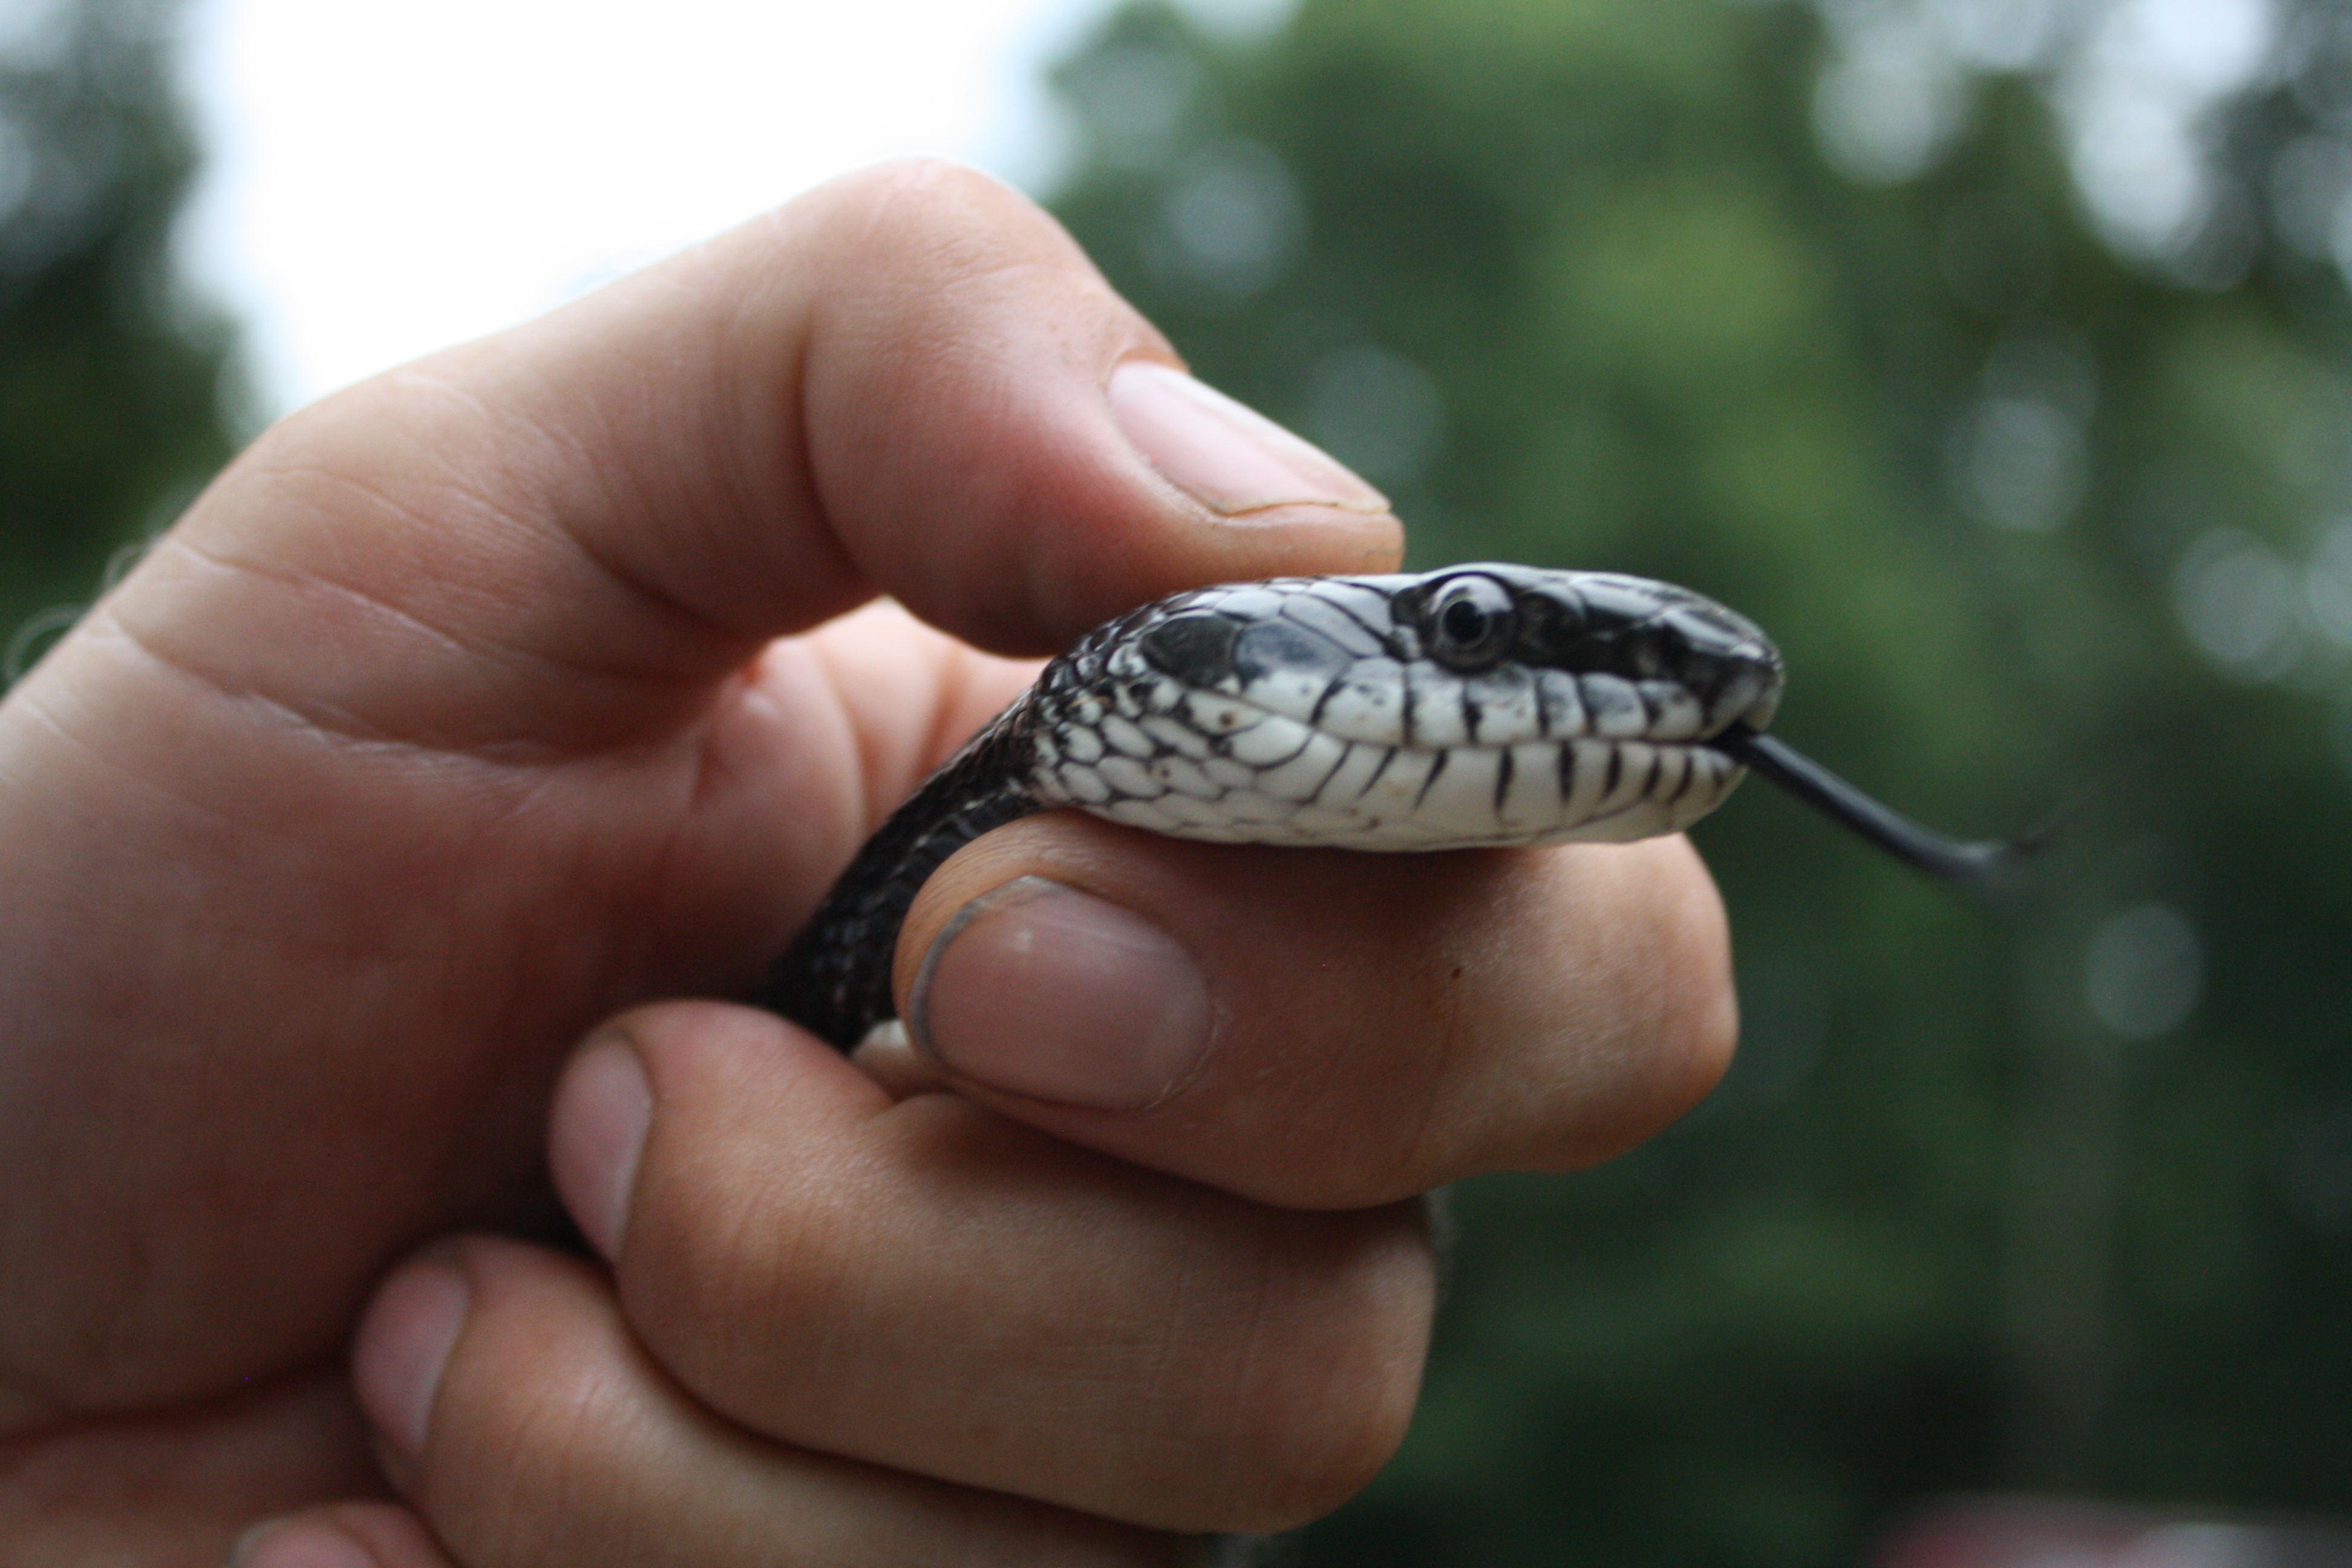 Found this guy with an egg in his mouth and one in his belly in my coop last night. He is an eastern rat snake,nonvenomous and has been relocated miles away. Can't blame him for being hungry